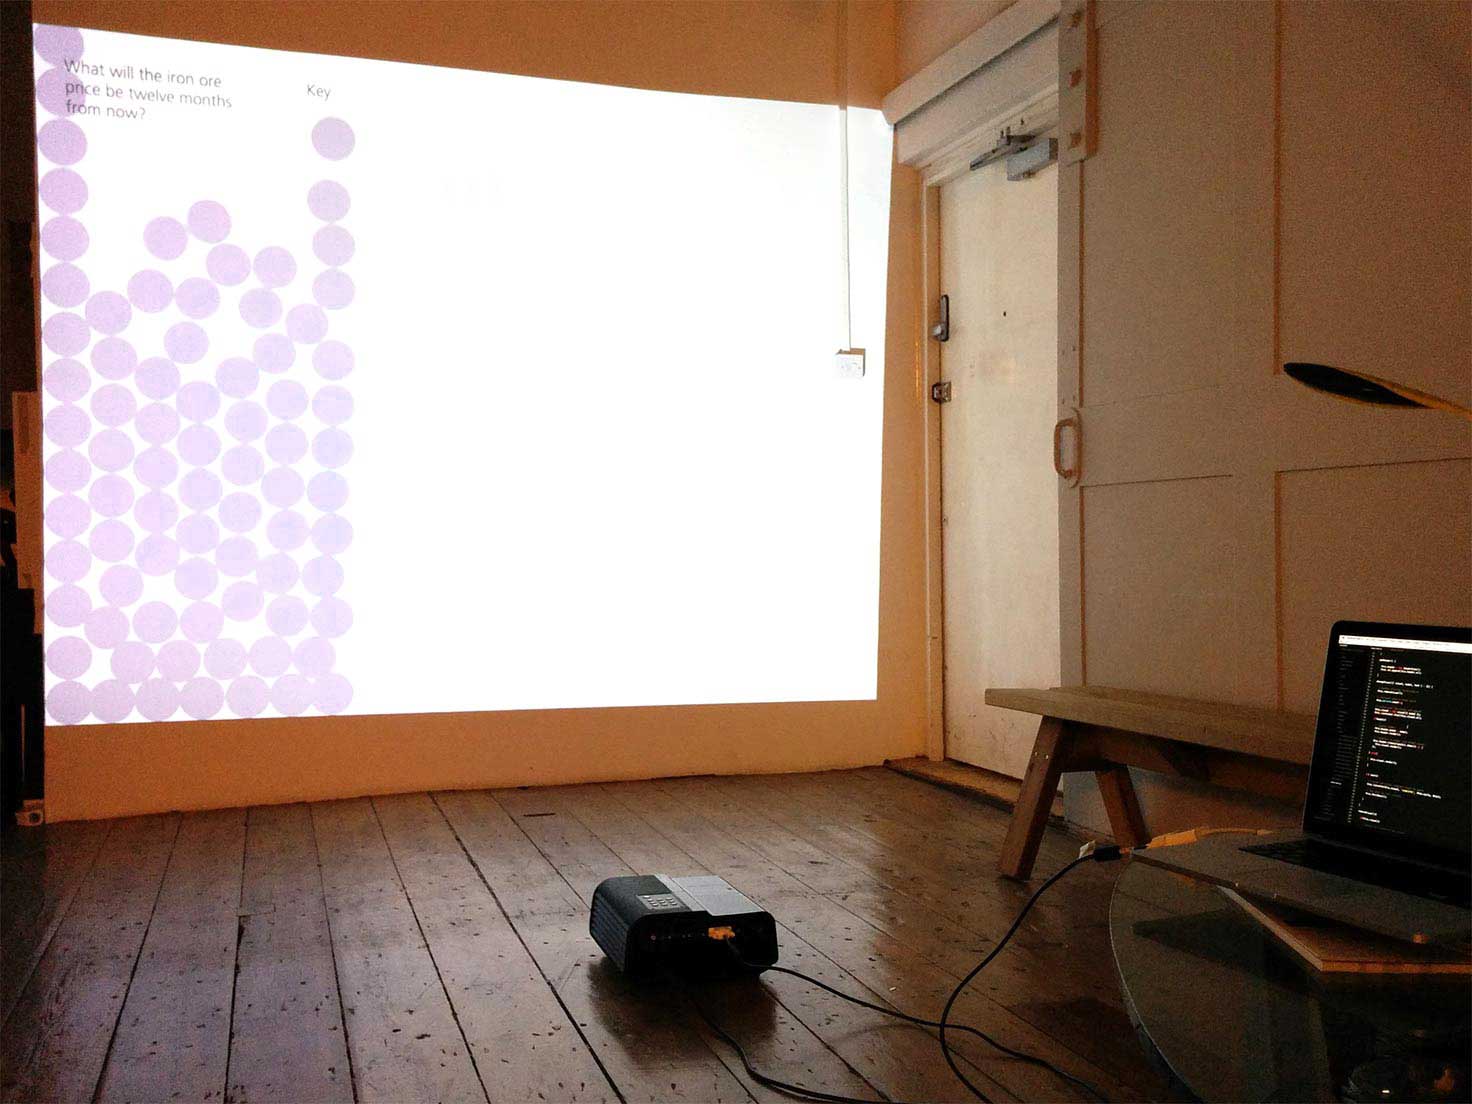 Projector on the floor projecting the visualisation on a office wall